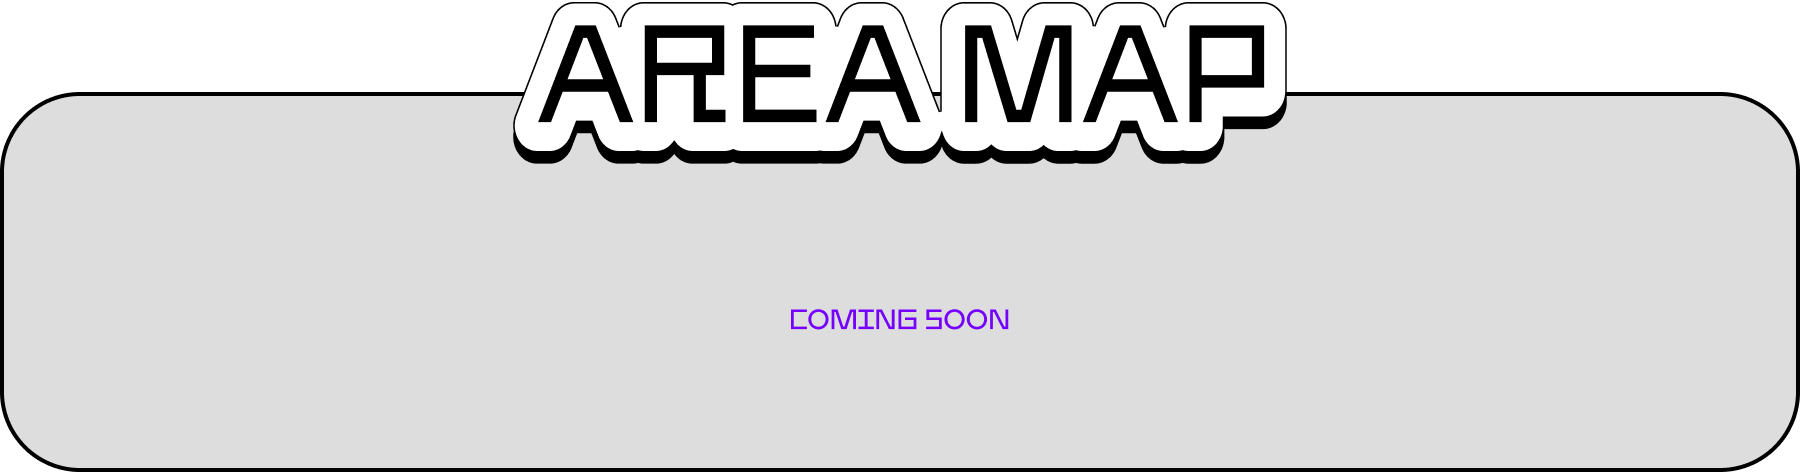 areamap coming soon